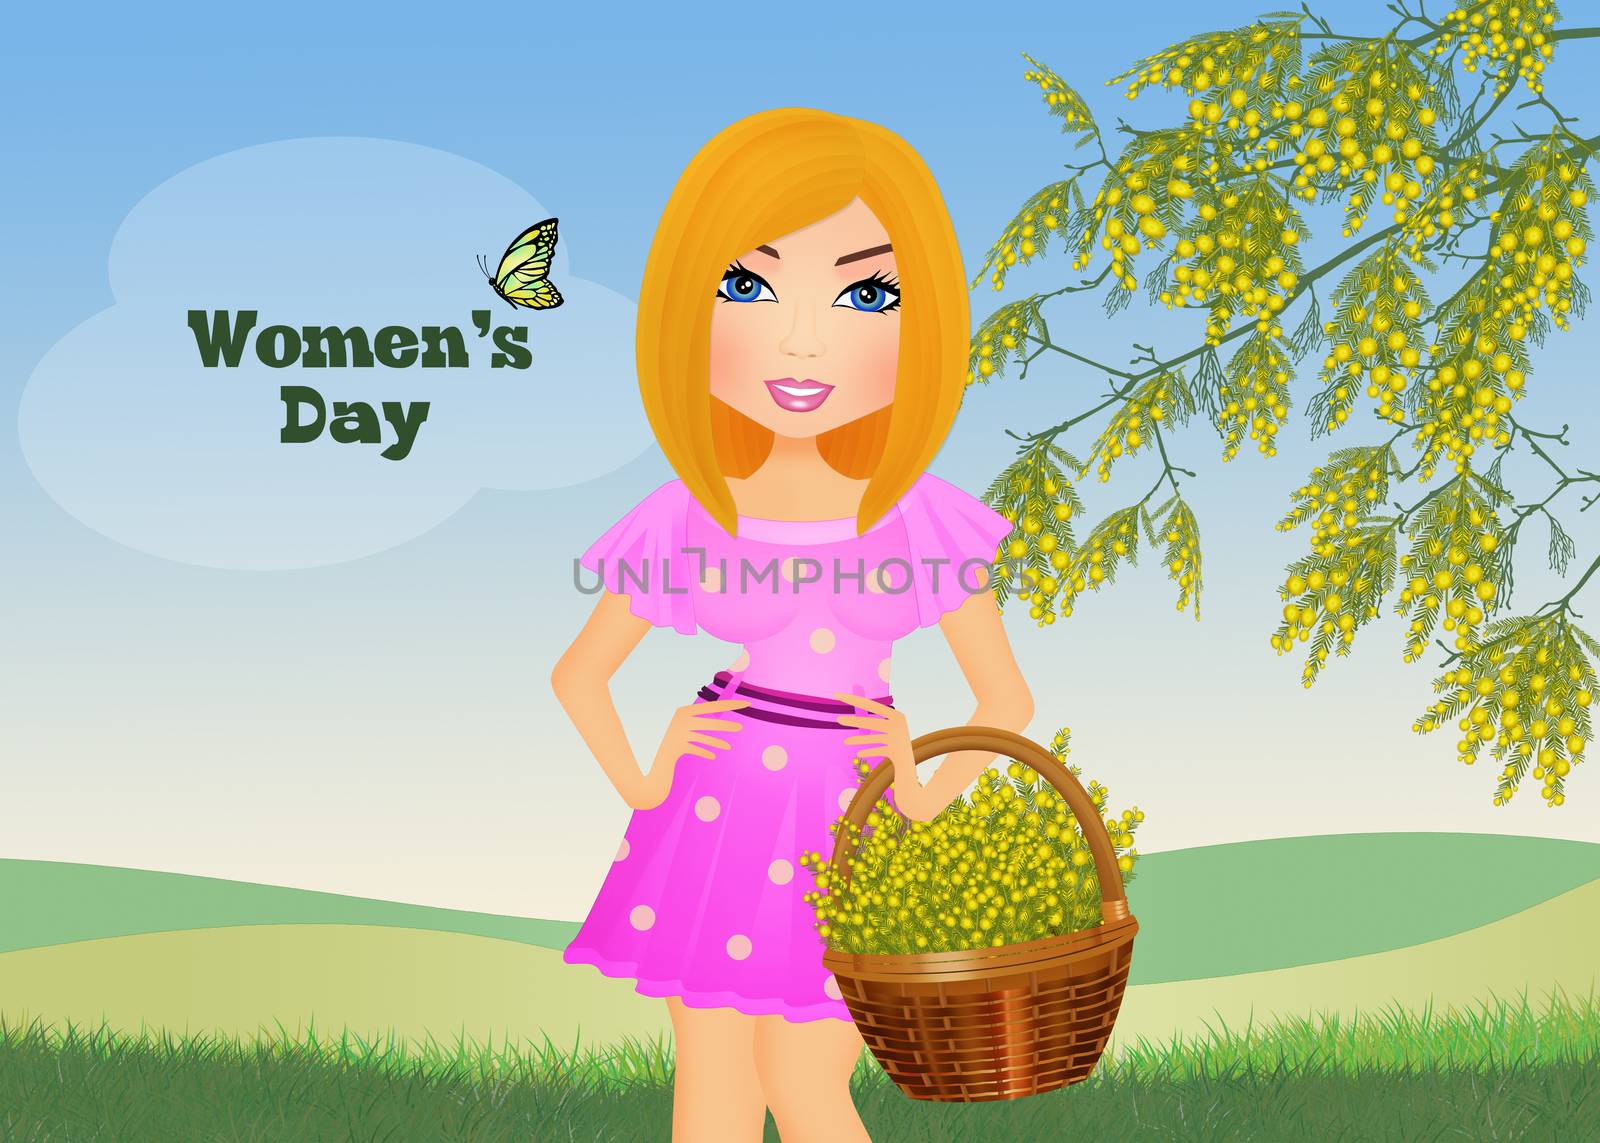 women's day with blonde girl with mimosa flowers by adrenalina